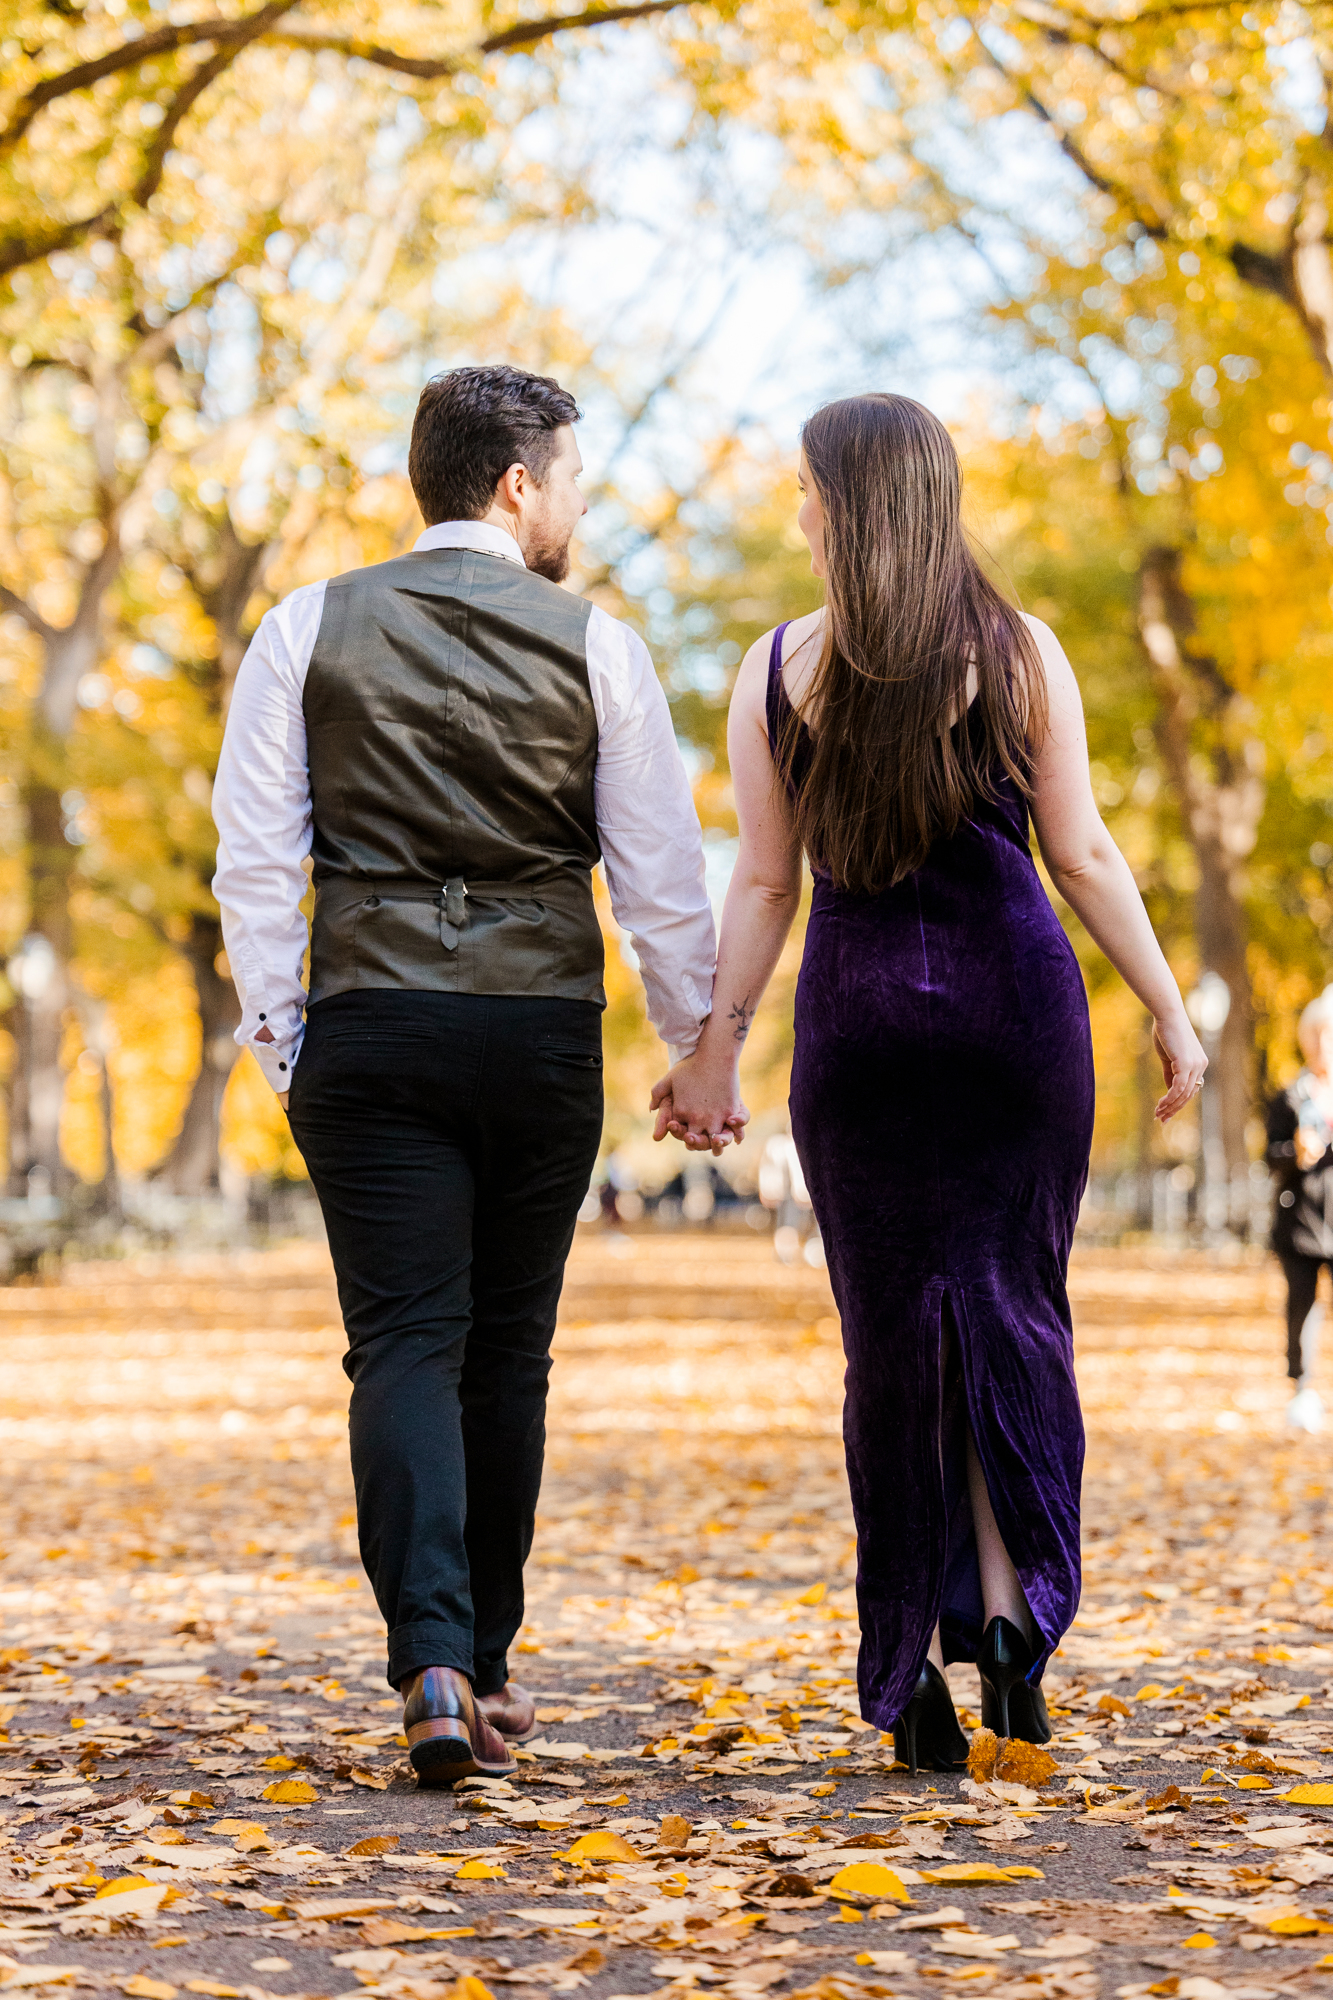 Charming Central Park Engagement Photography Session